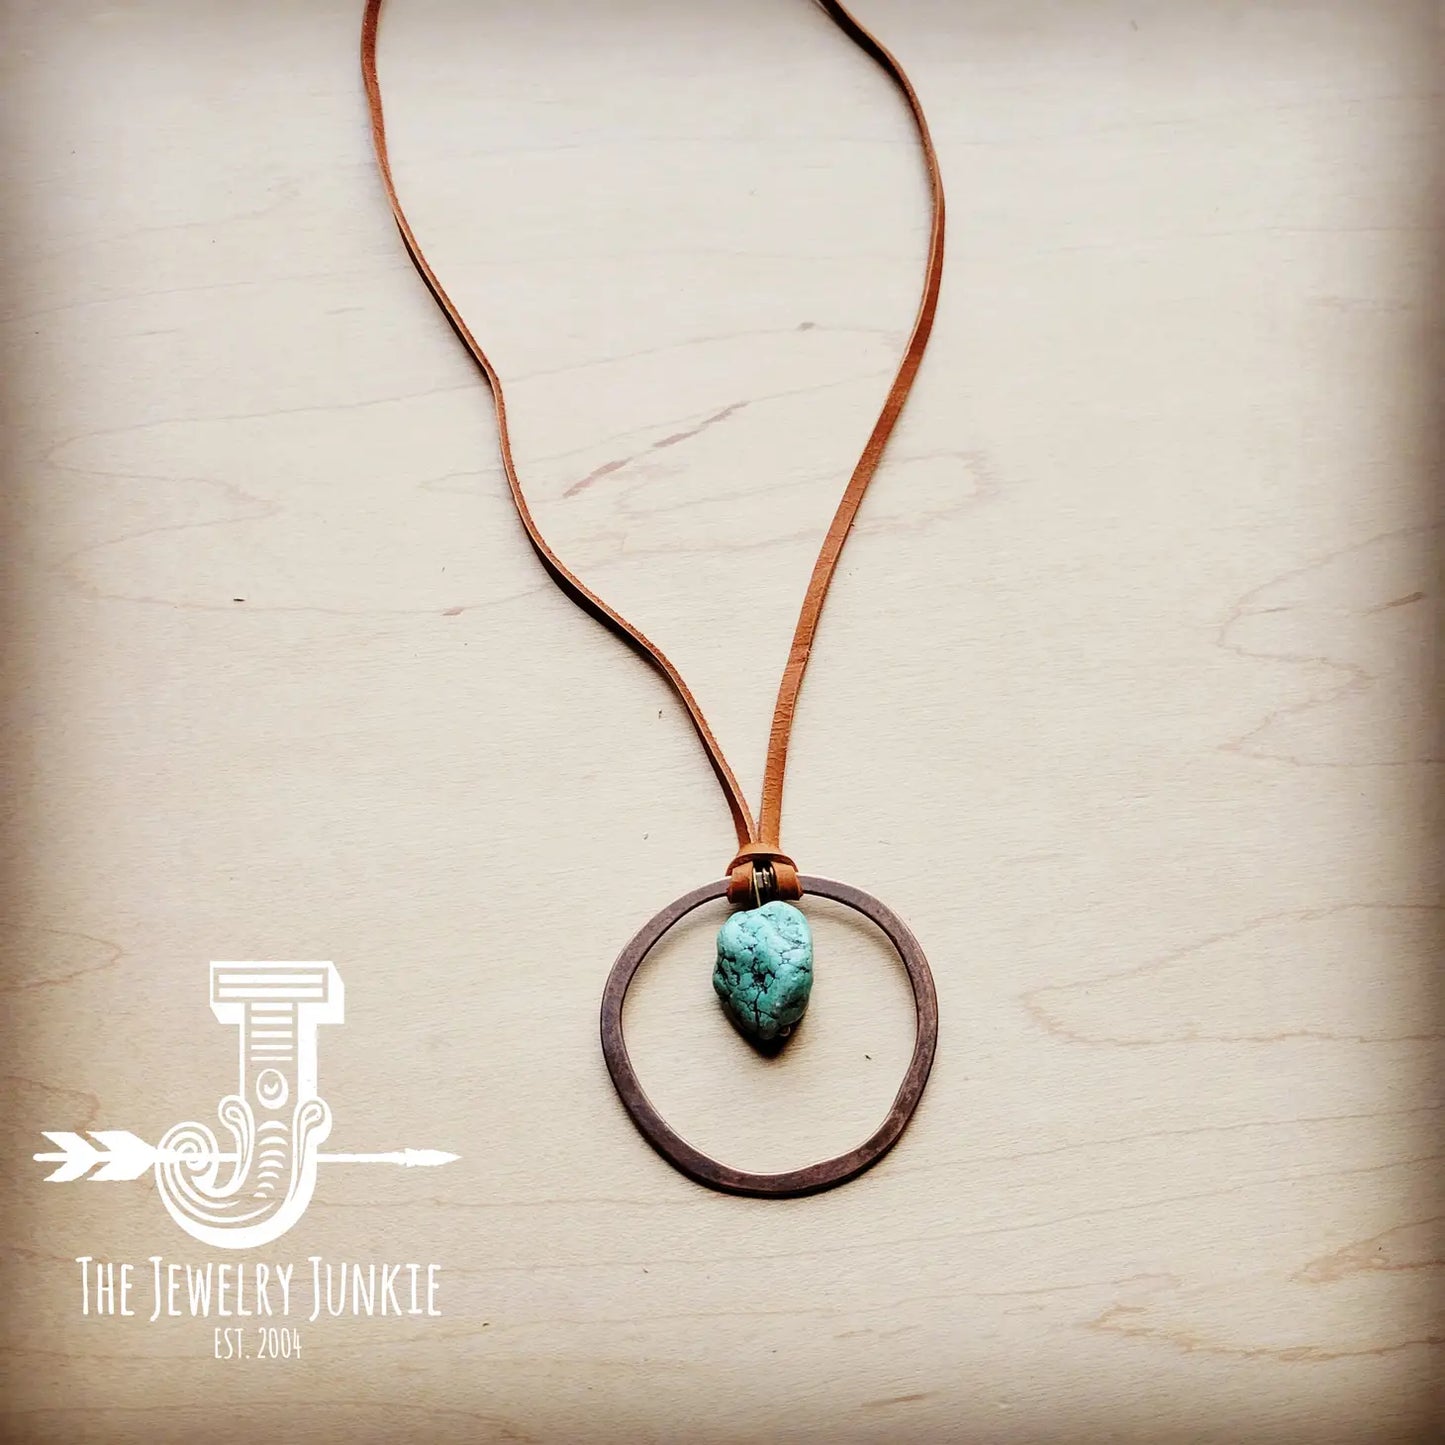 Leather Cord Necklace w/ Antique Gold Hoop & Turquoise